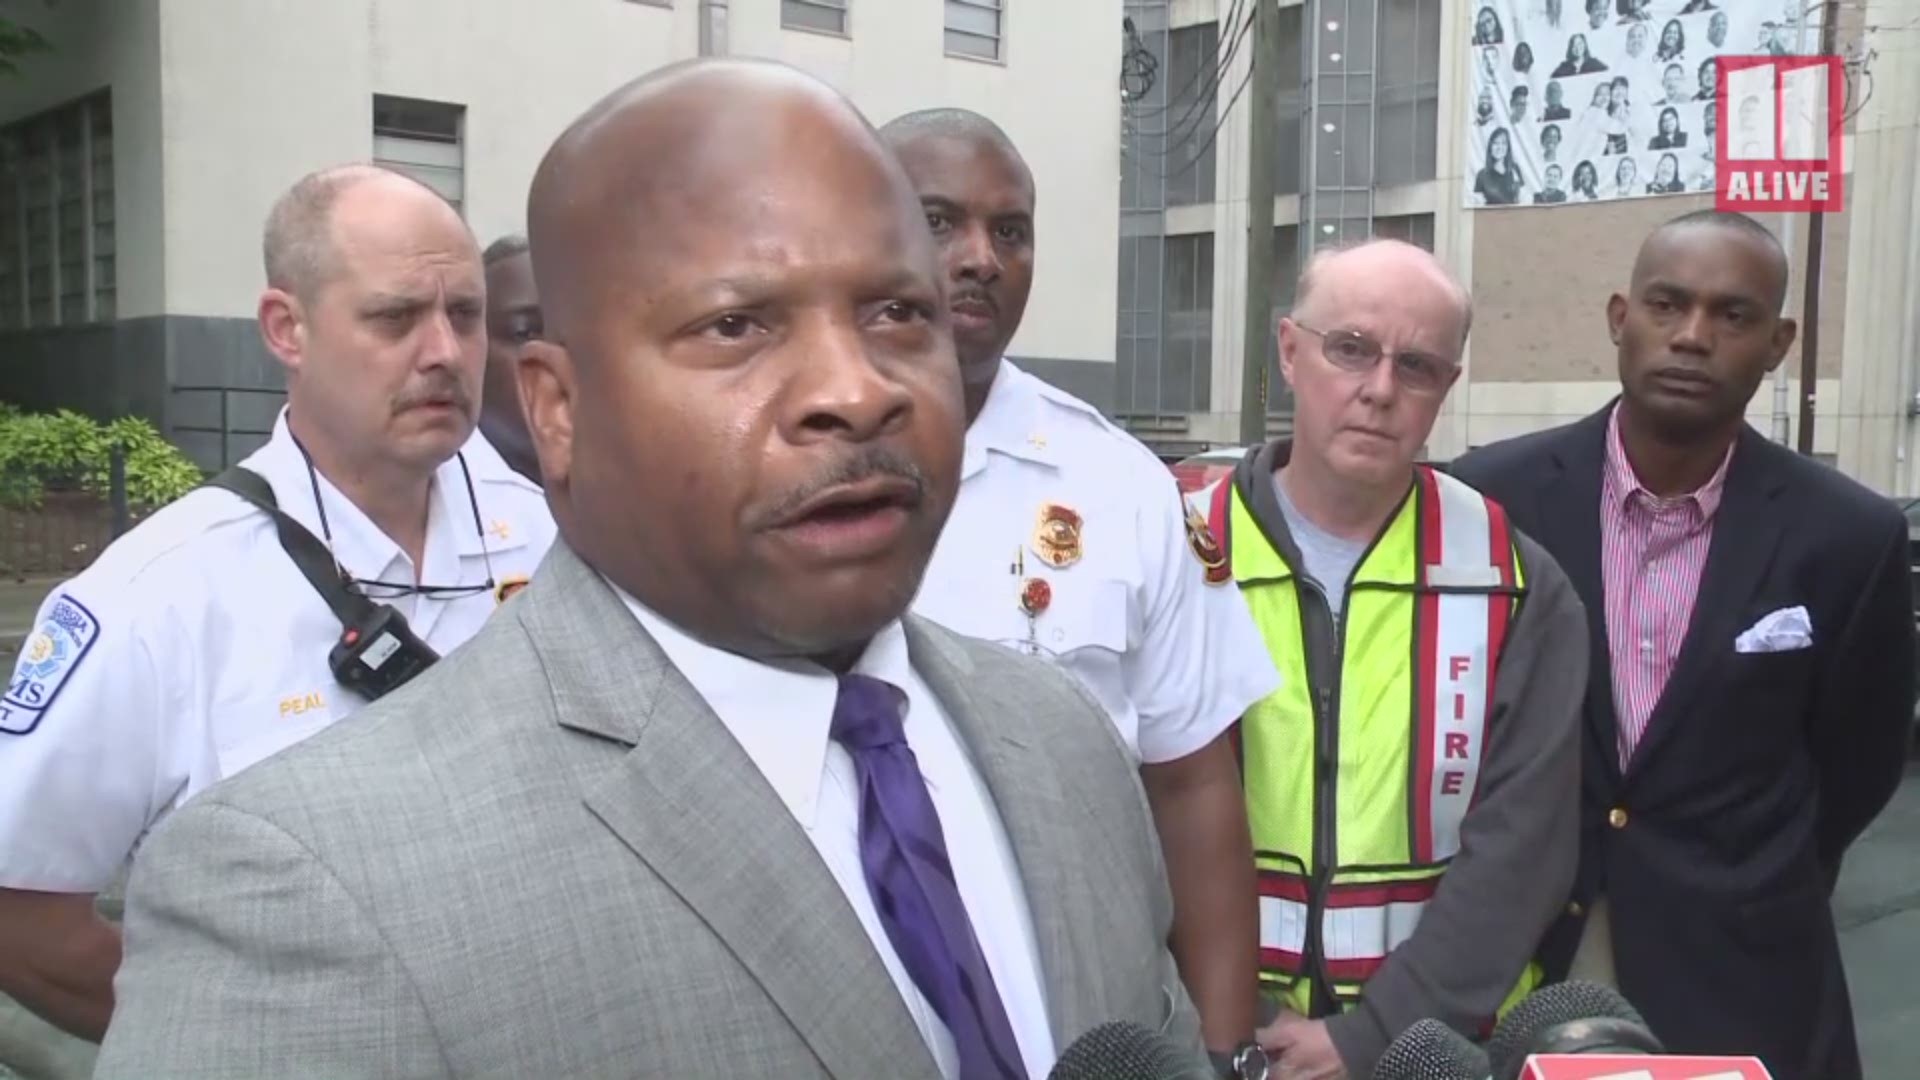 Atlanta Fire Chief Randall Slaughter provided an update Sunday morning on a fire sergeant who was seriously injured as he responded to a wreck on I-85 at Cleveland Avenue. The sergeant was struck by another vehicle as he stepped off of his the truck.